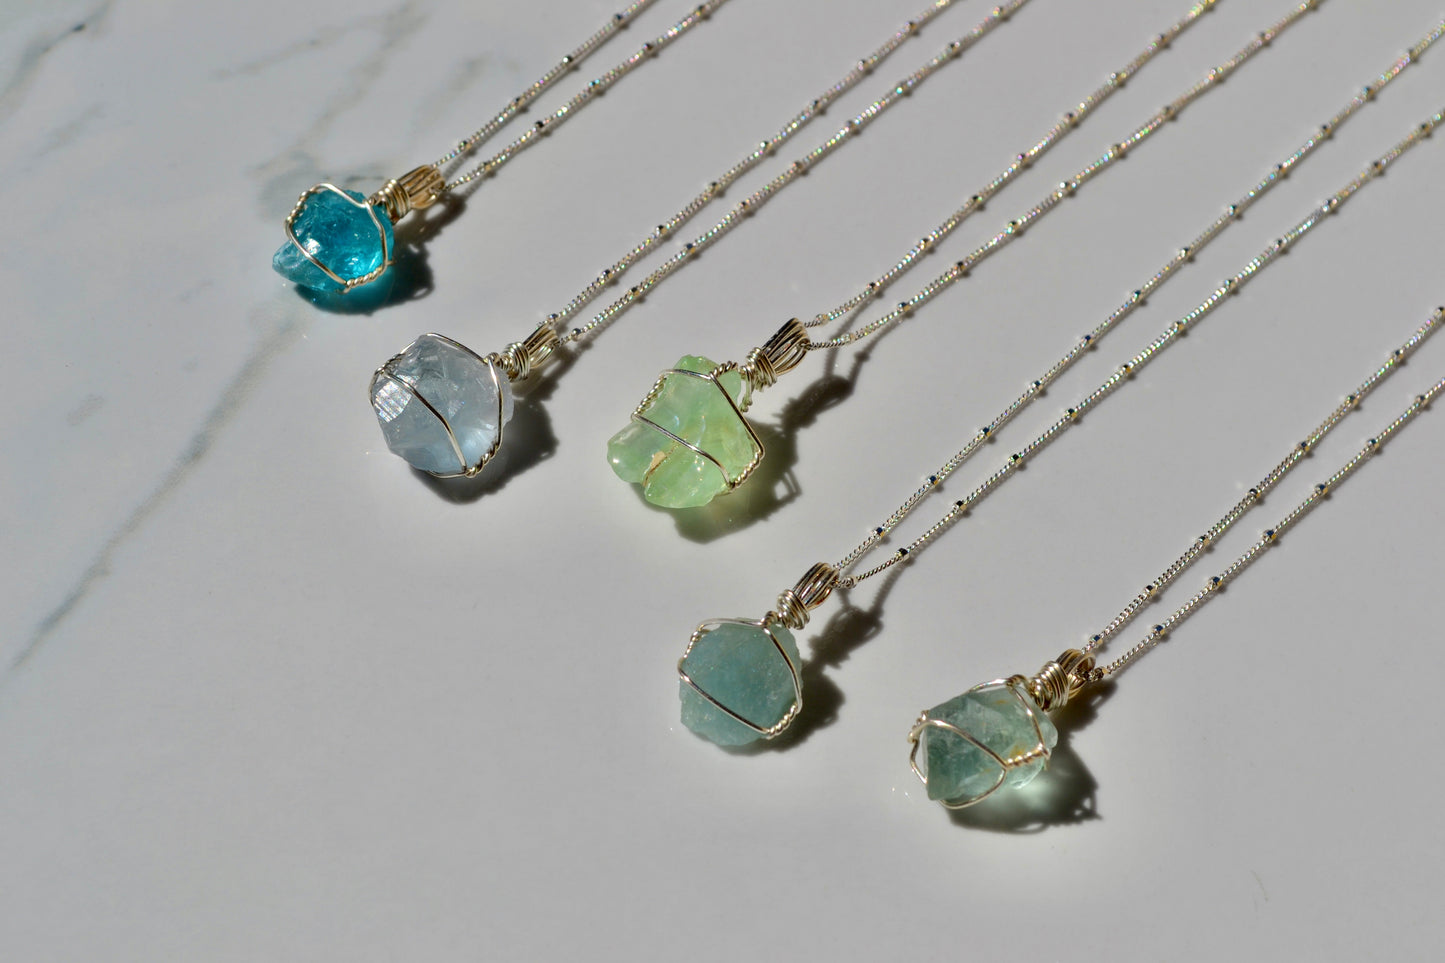 Green Calcite Crystal Necklace Mini